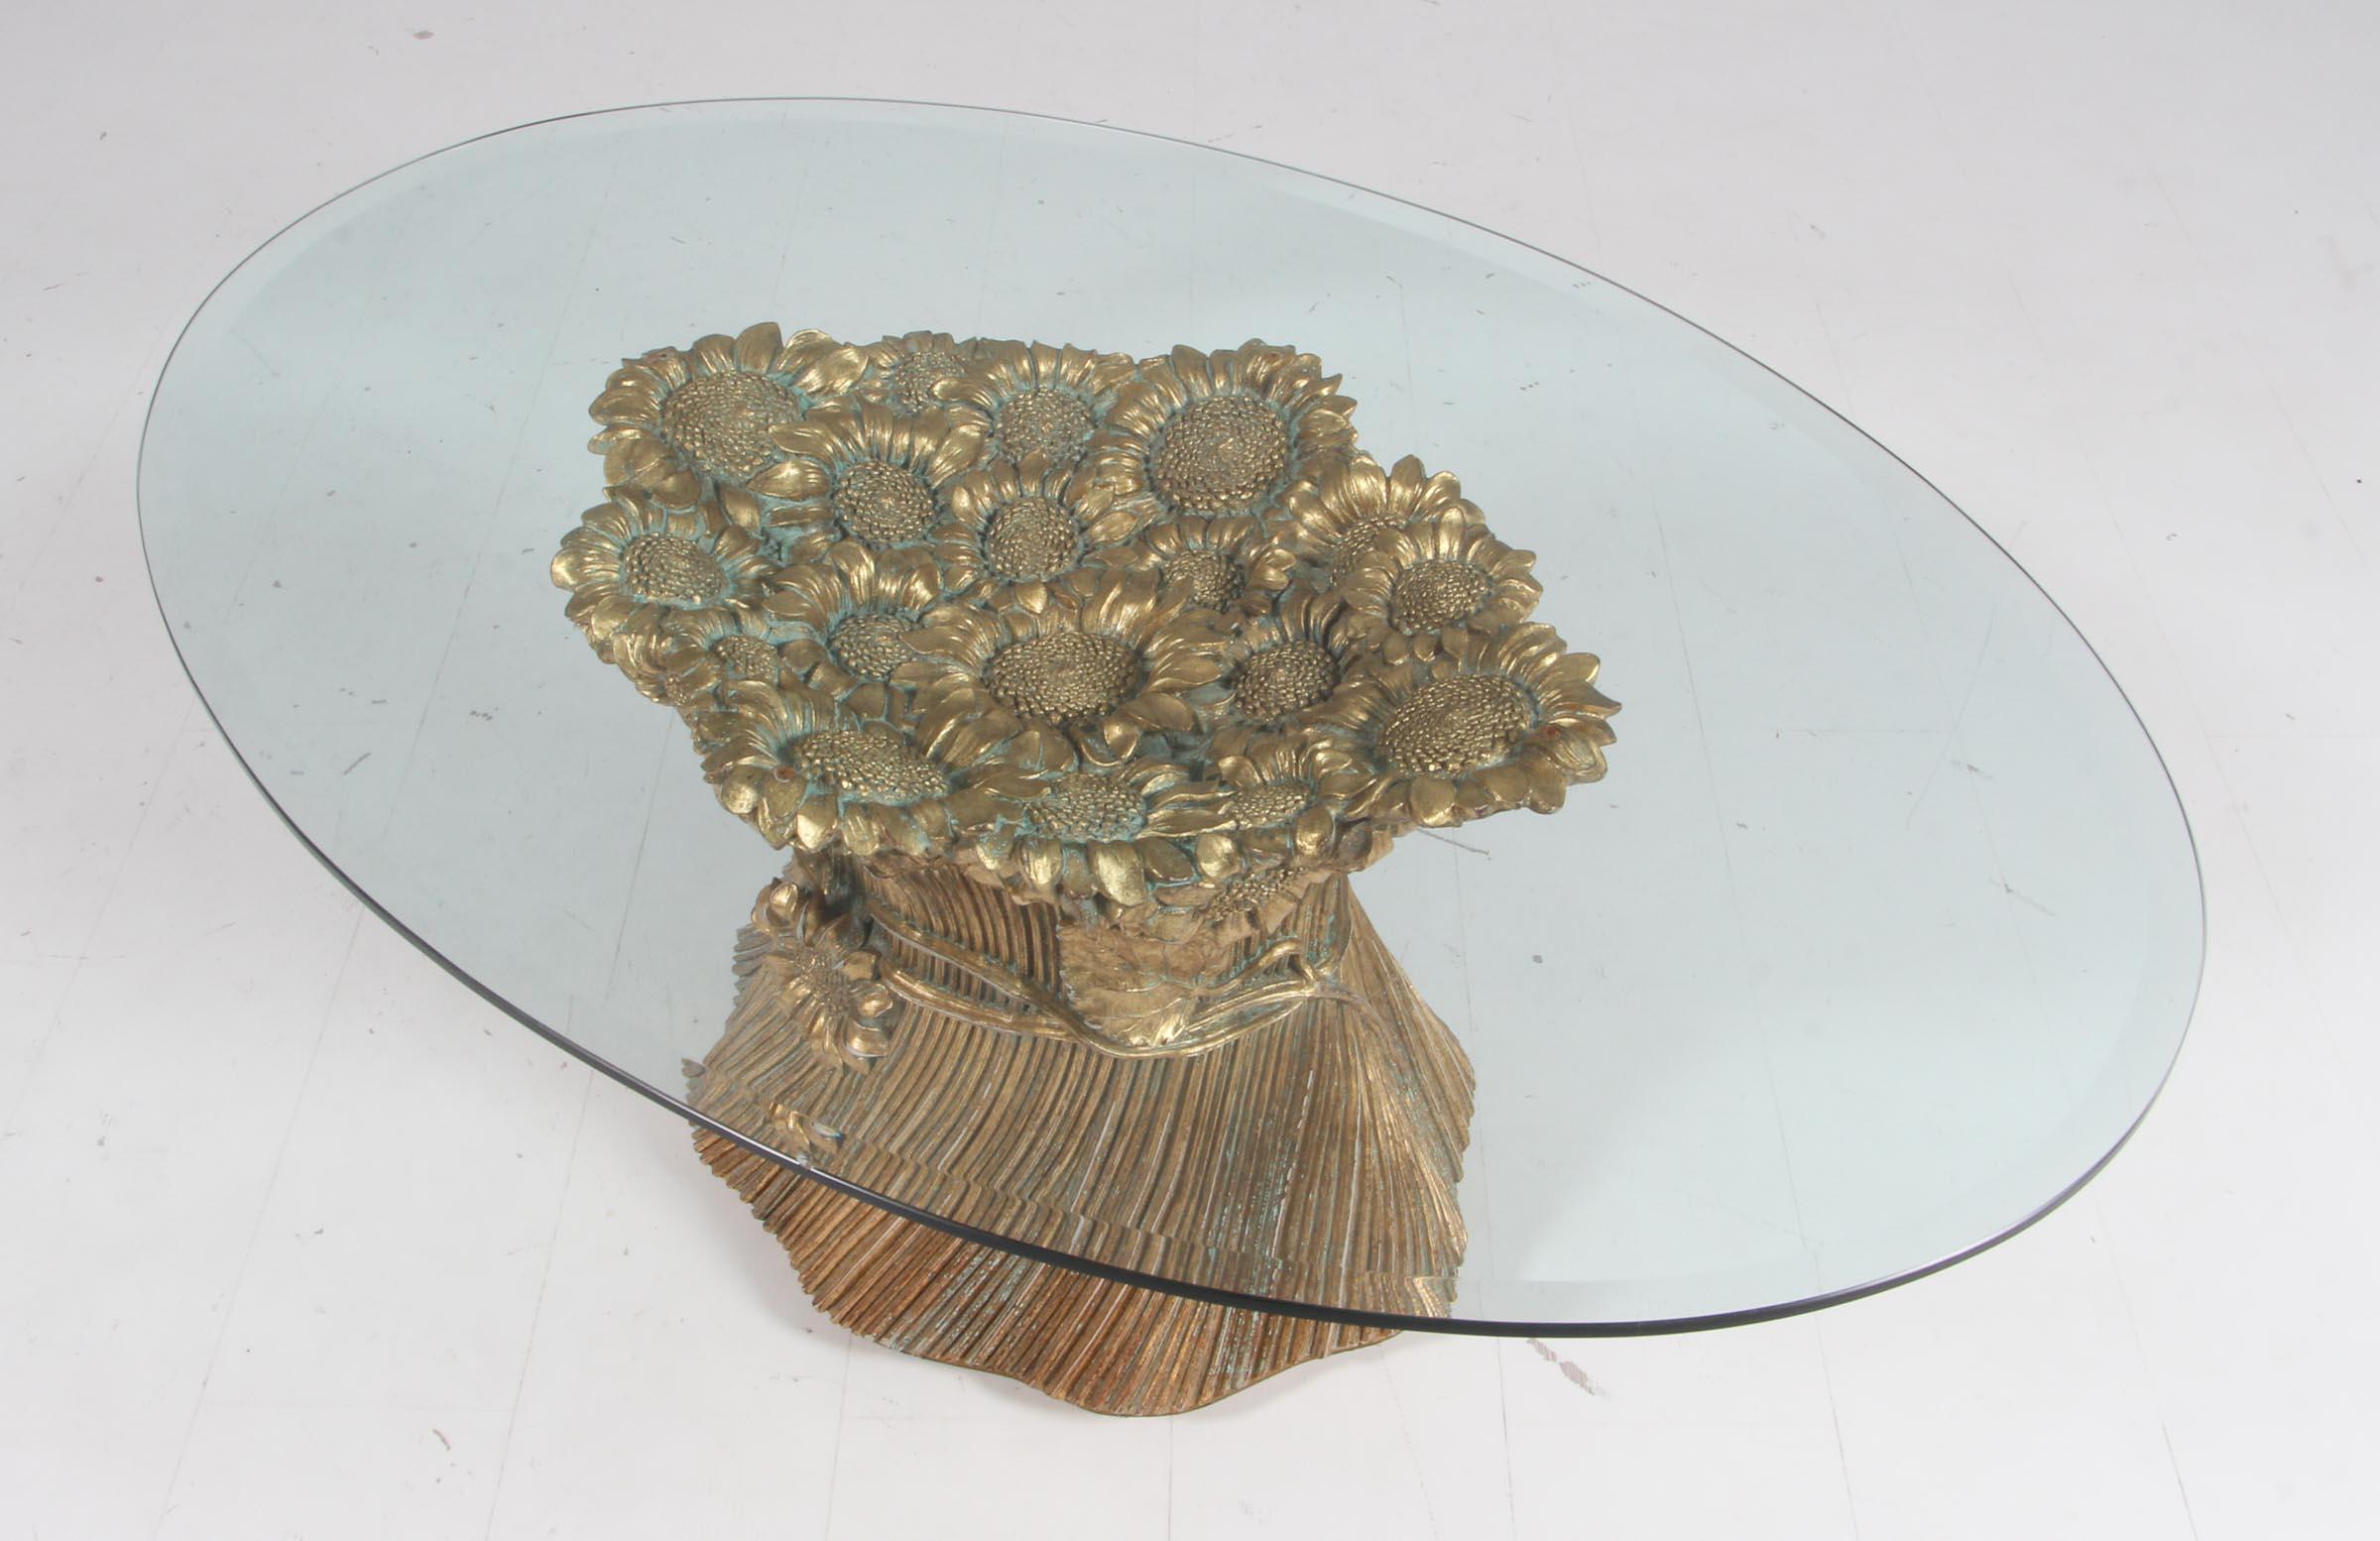 Morex coffee table in gold plated wood with floral decorations.

Glass top.

Made by Morex in the 1950s